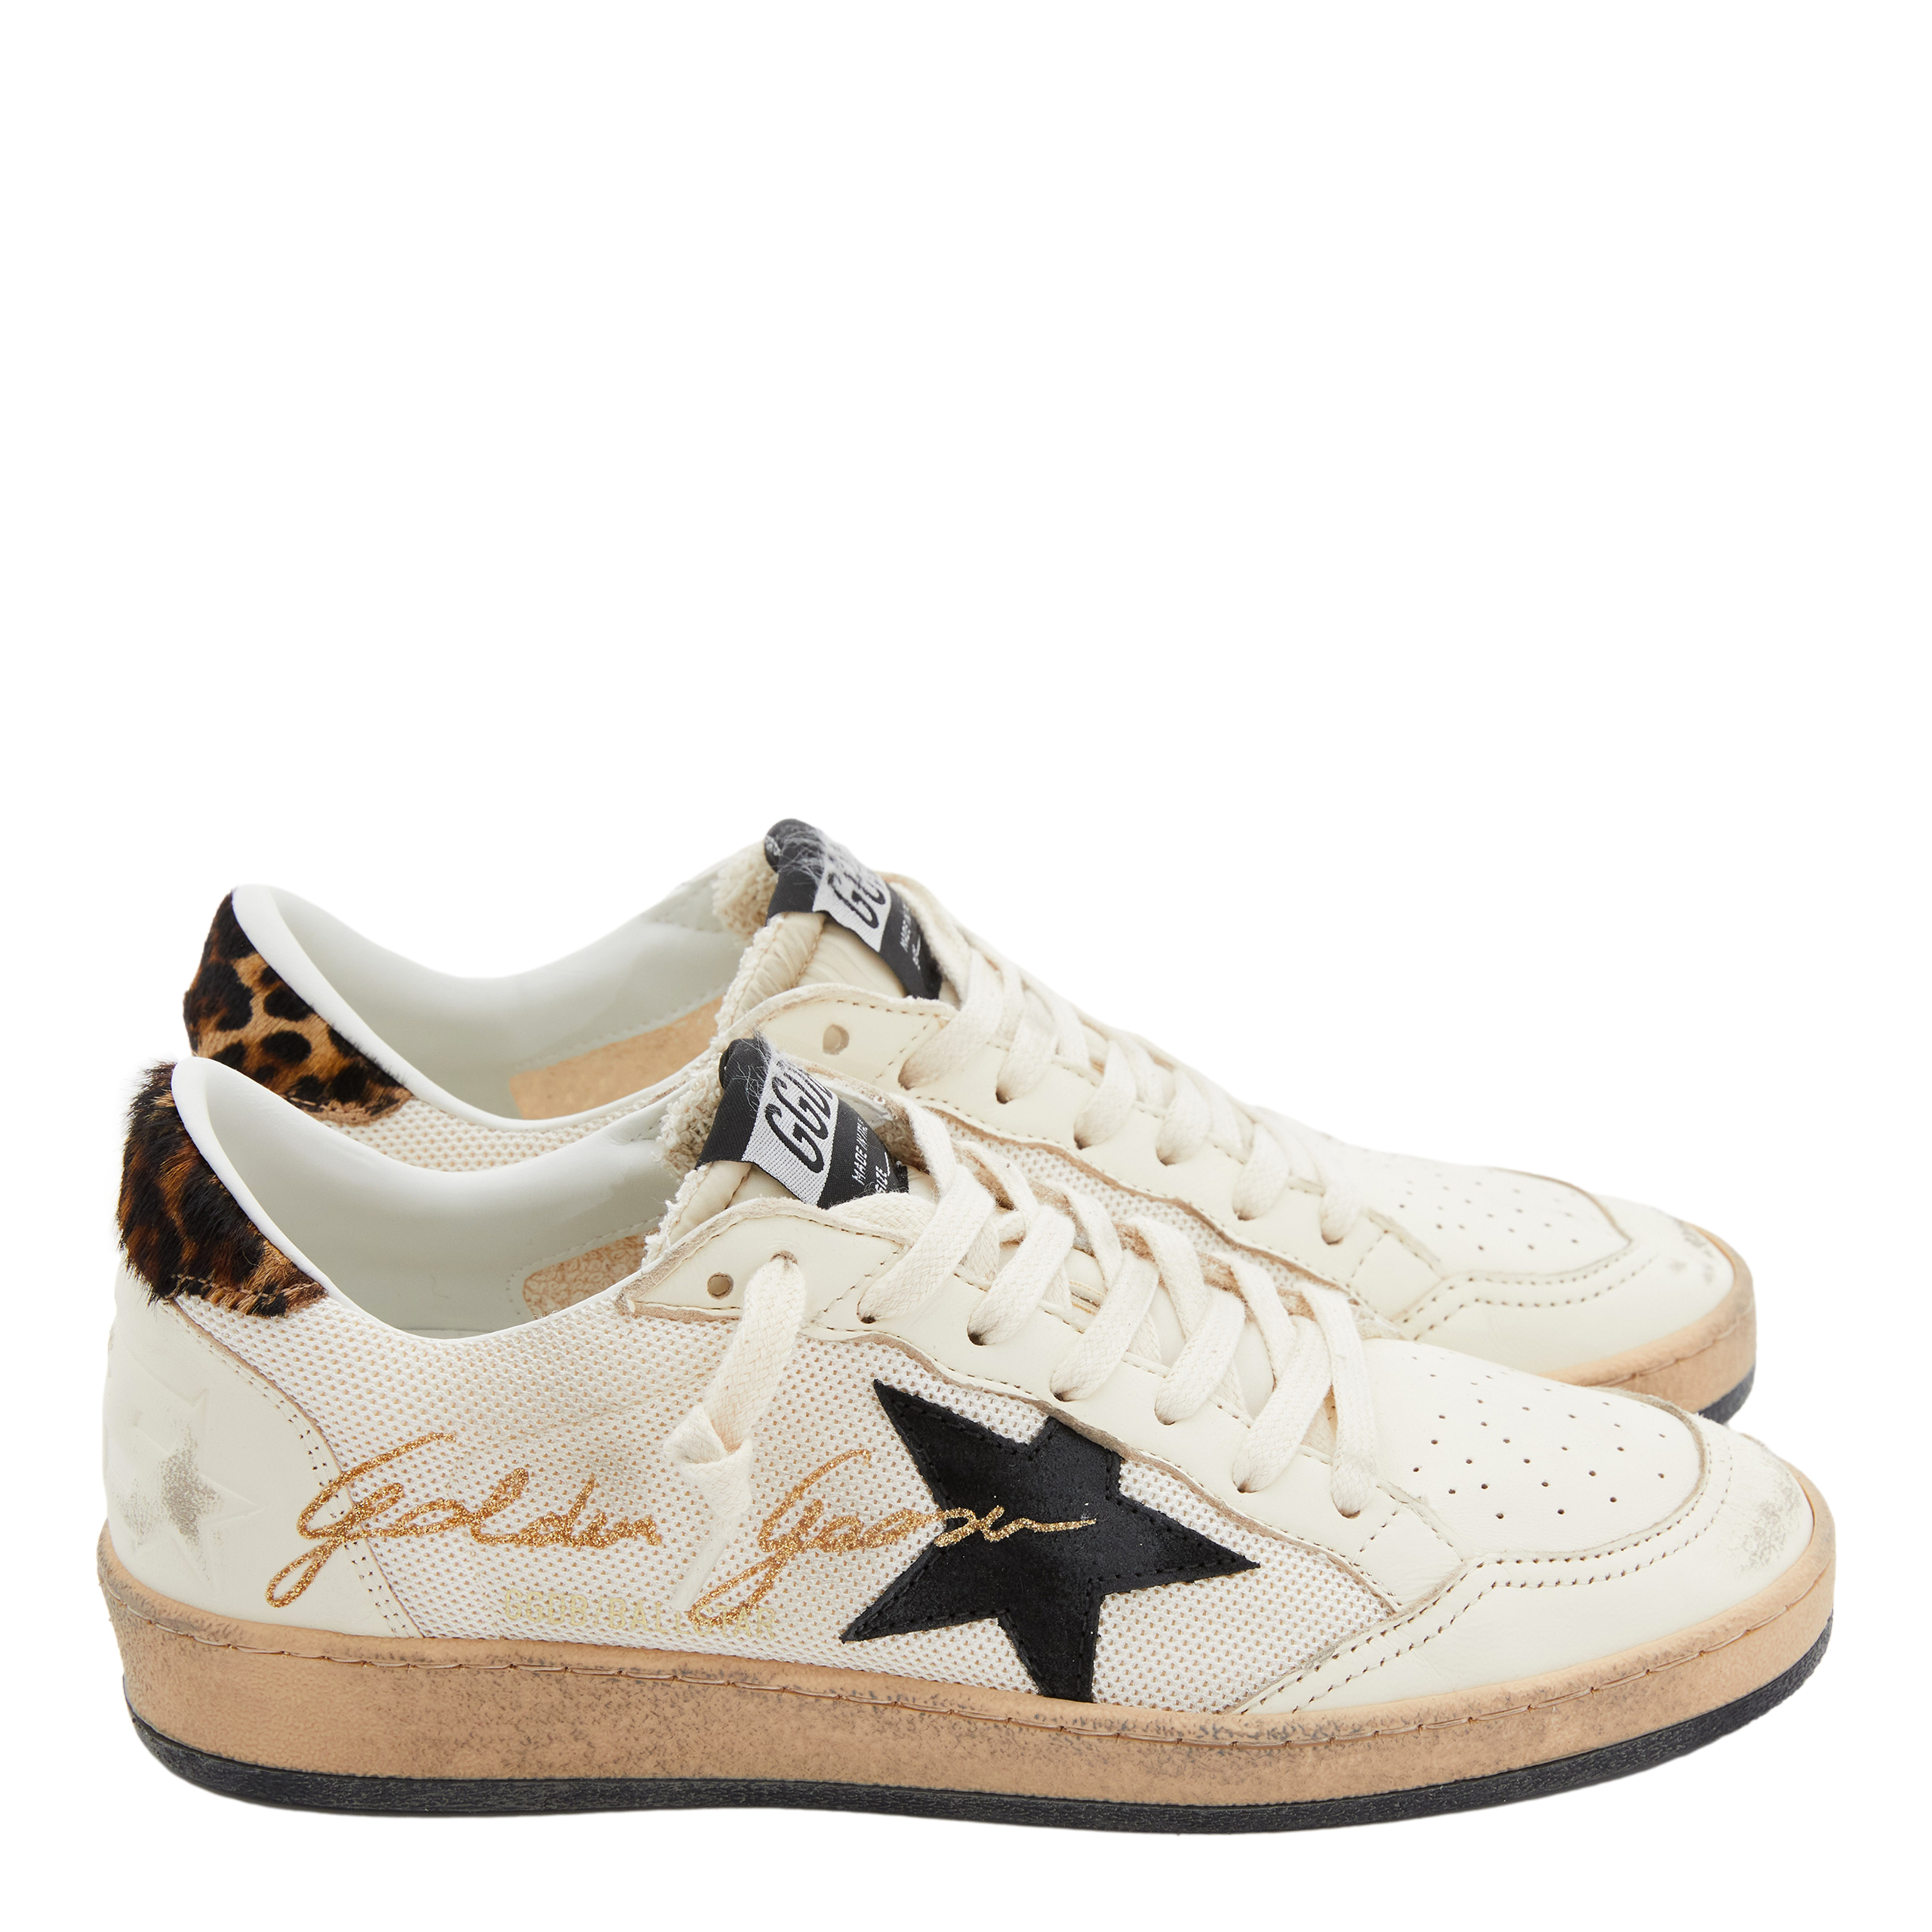 None Golden Goose Deluxe Brand GMF00464/F005051/81472, размер 40;41;42;43;44;45